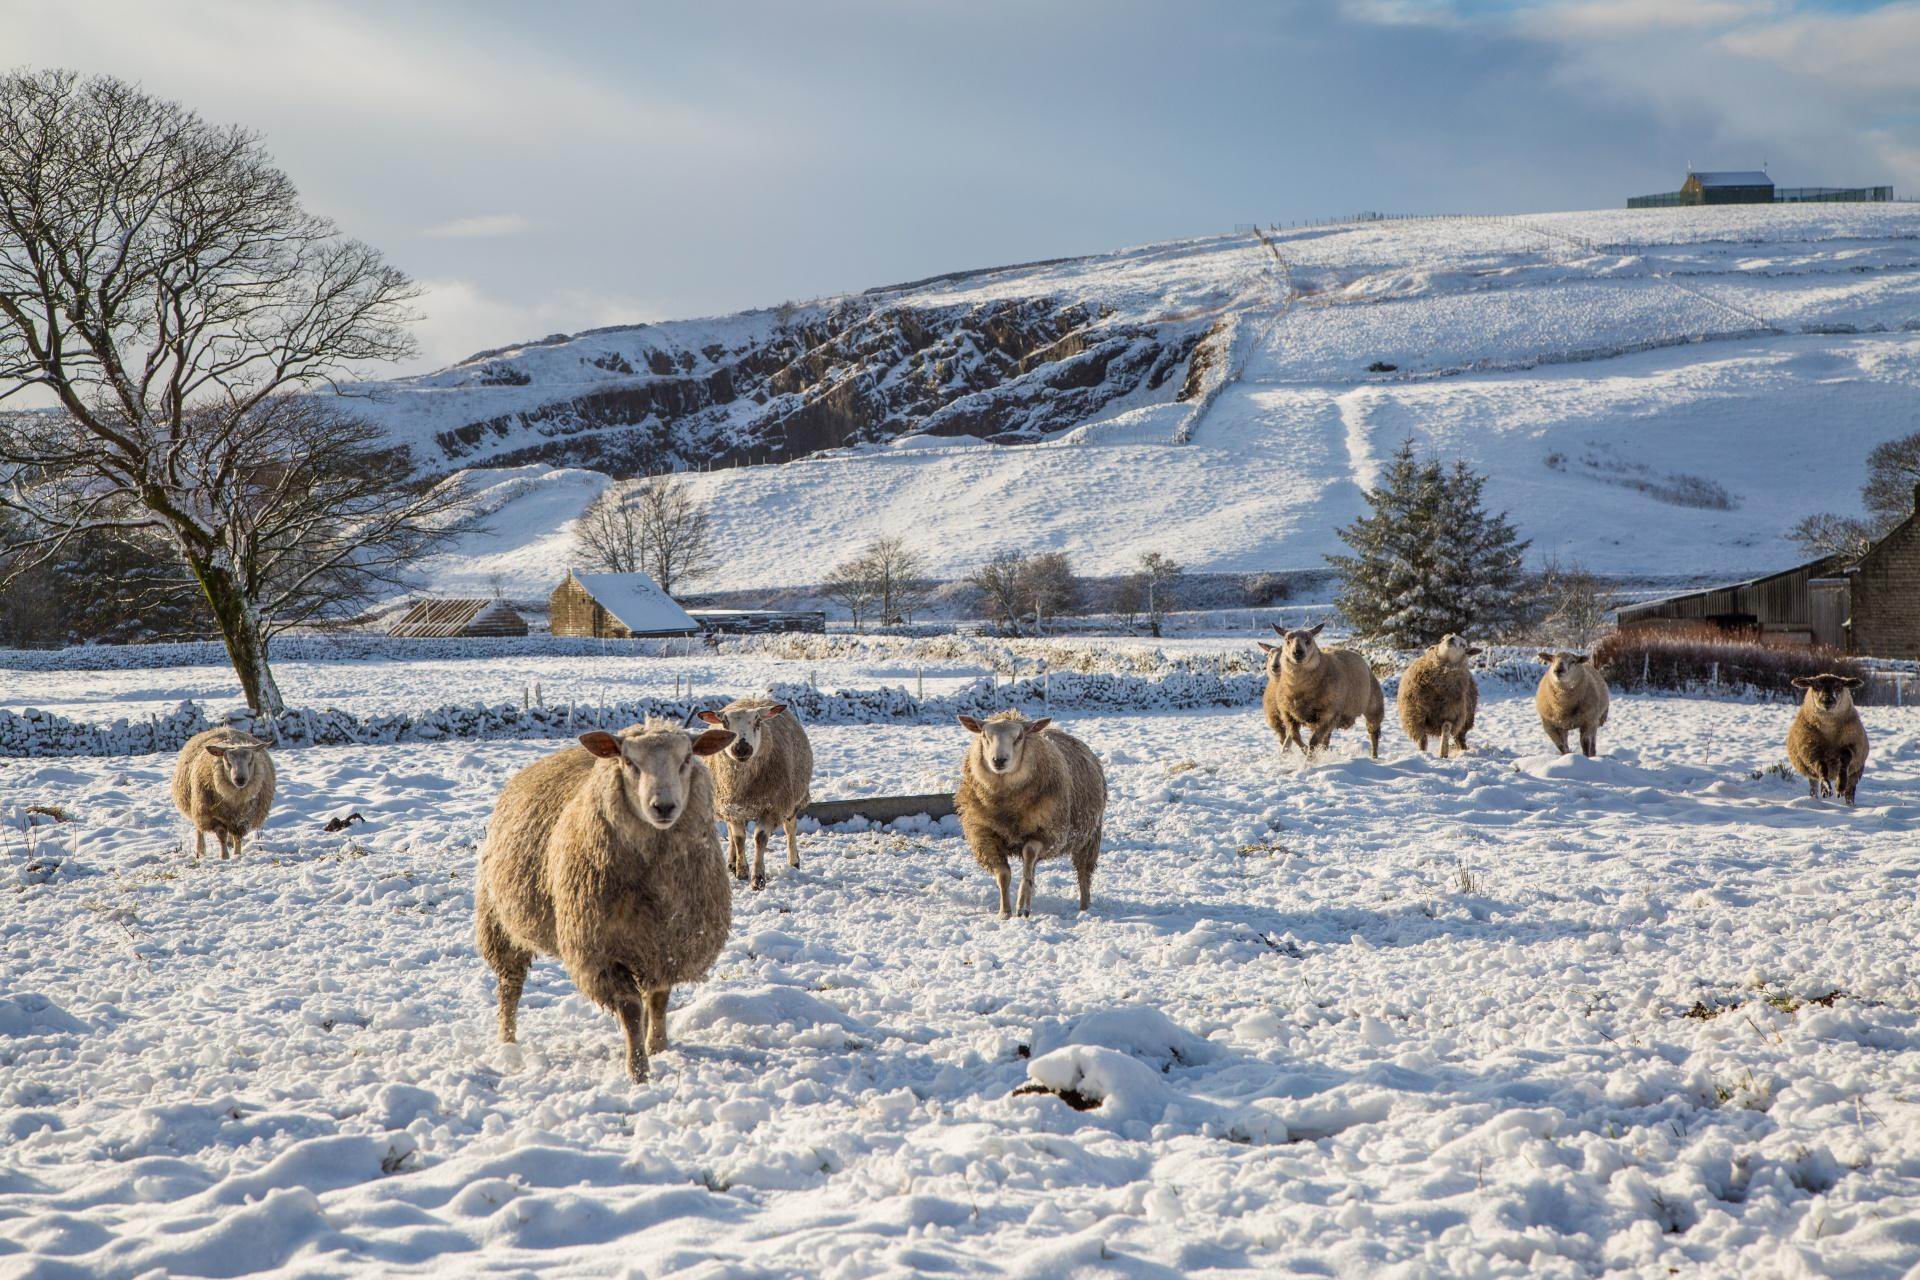 Sheep in the Snow by George Hodan